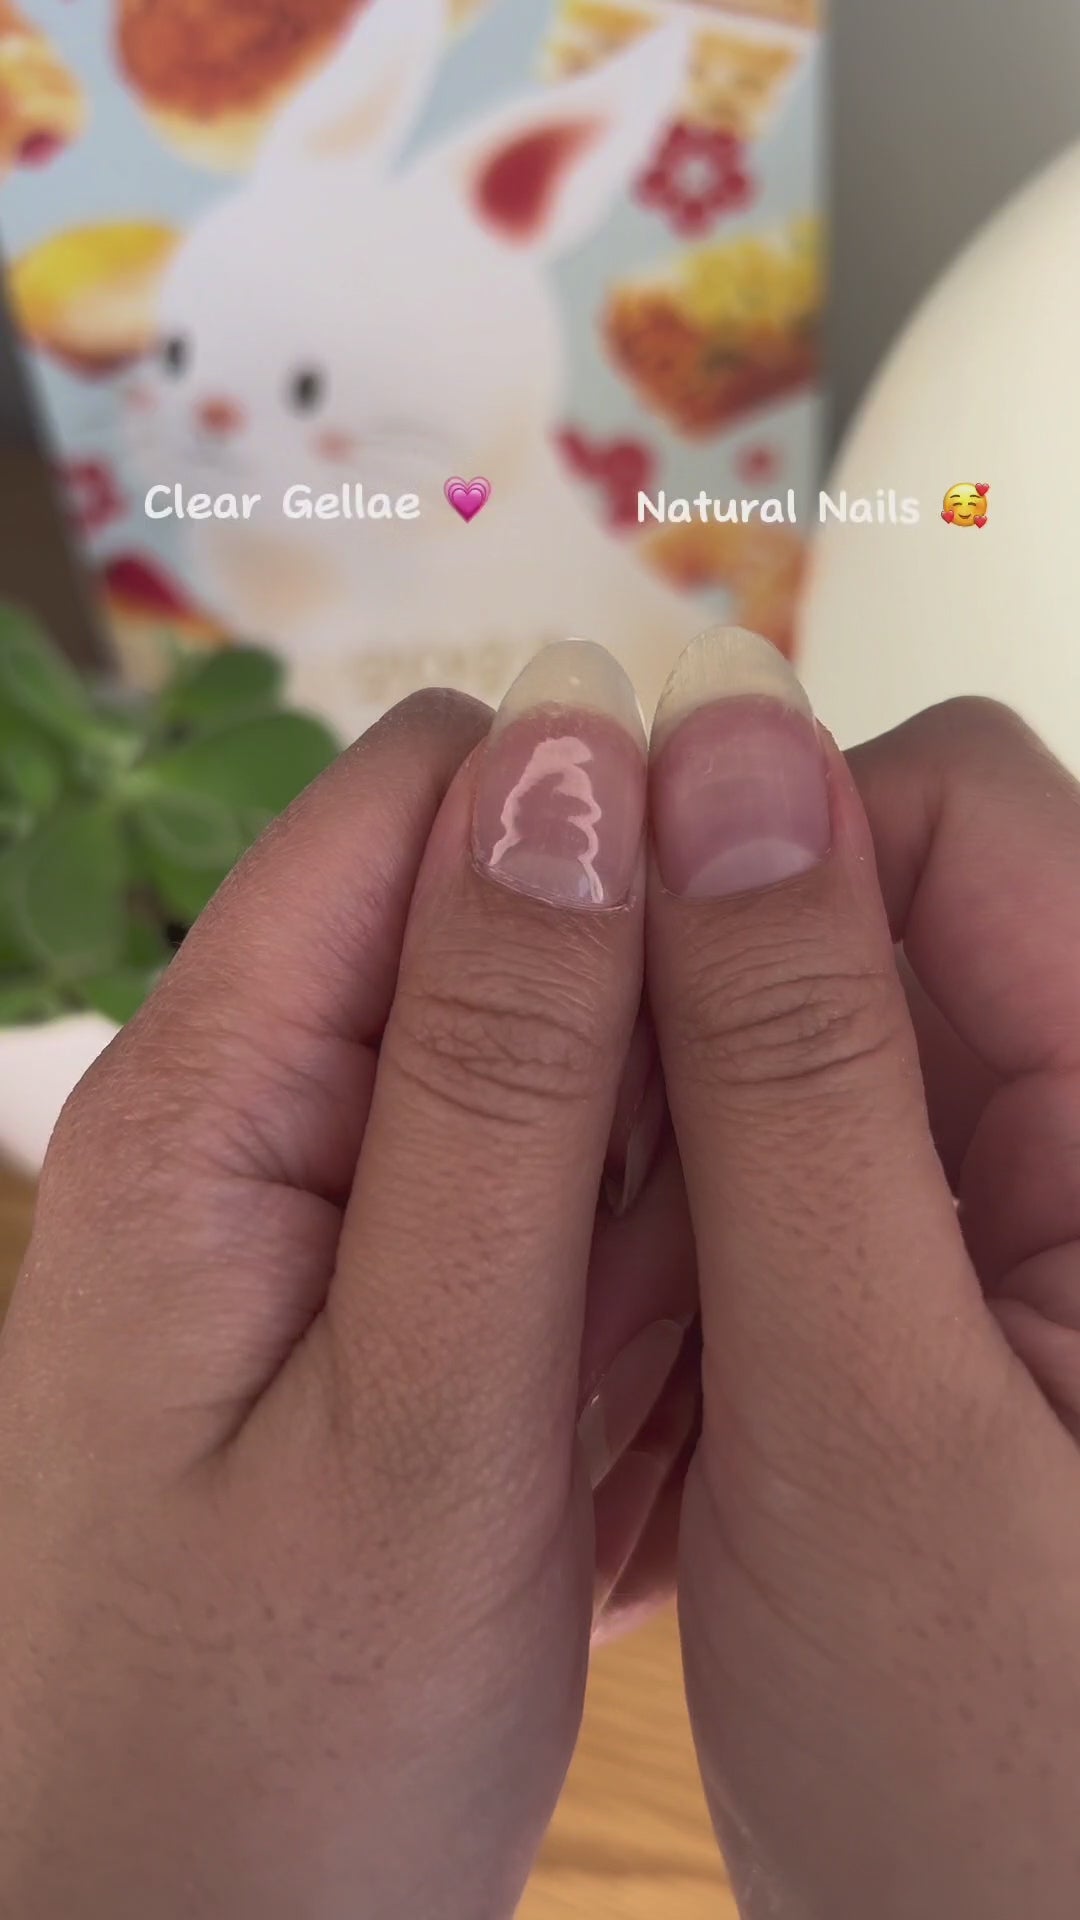 10 facts you didn't know about nails | FingerNails2go